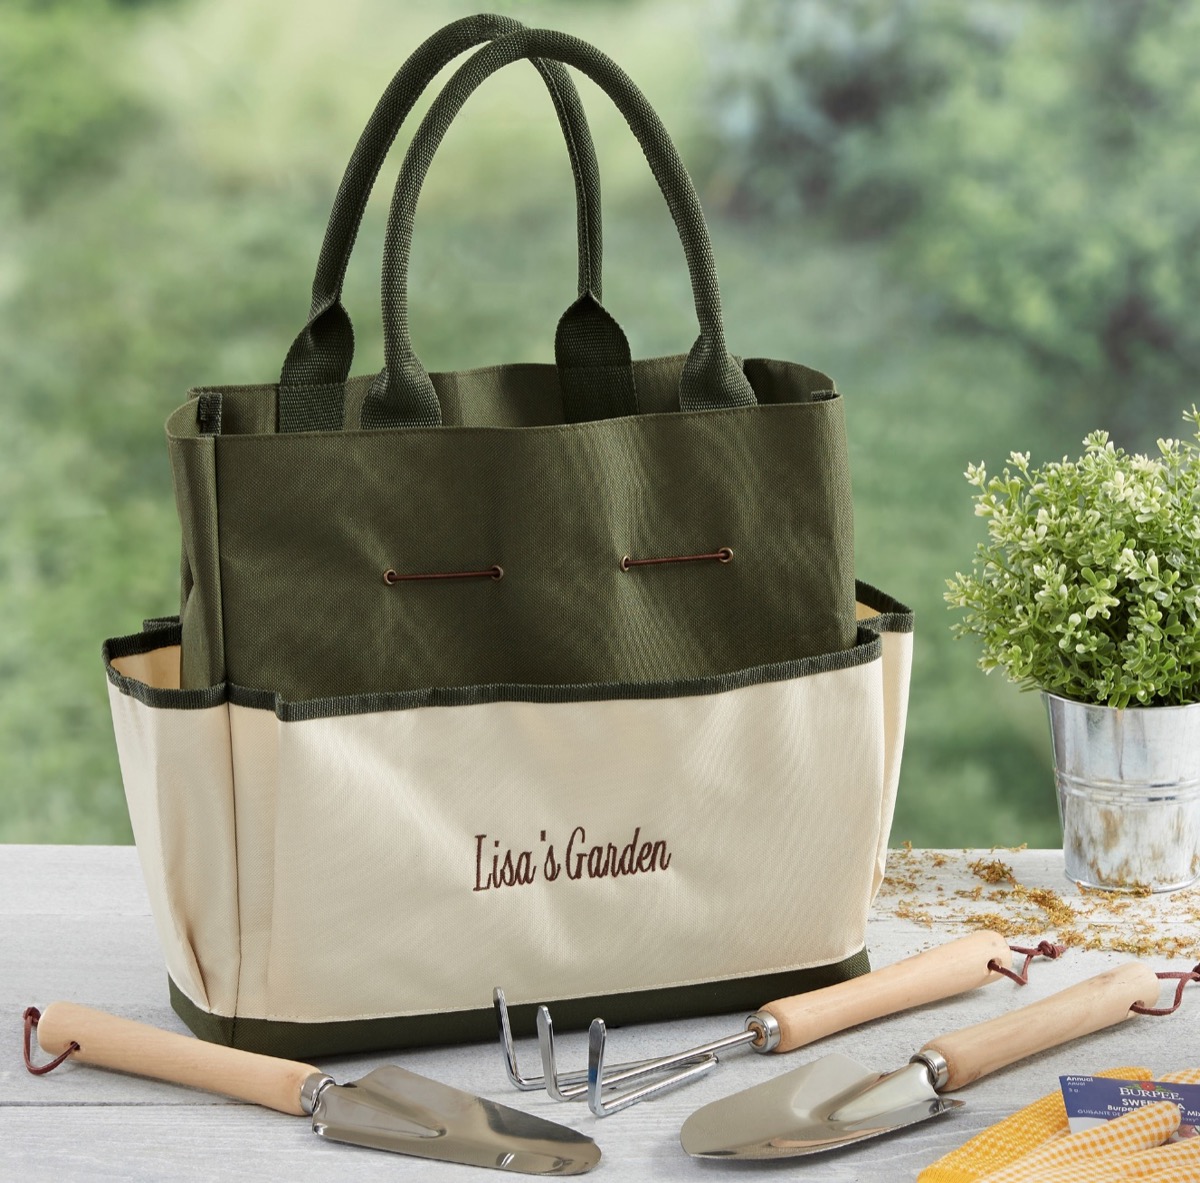 green and white tote with the words "Lisa's Garden" on it, best gifts for grandparents